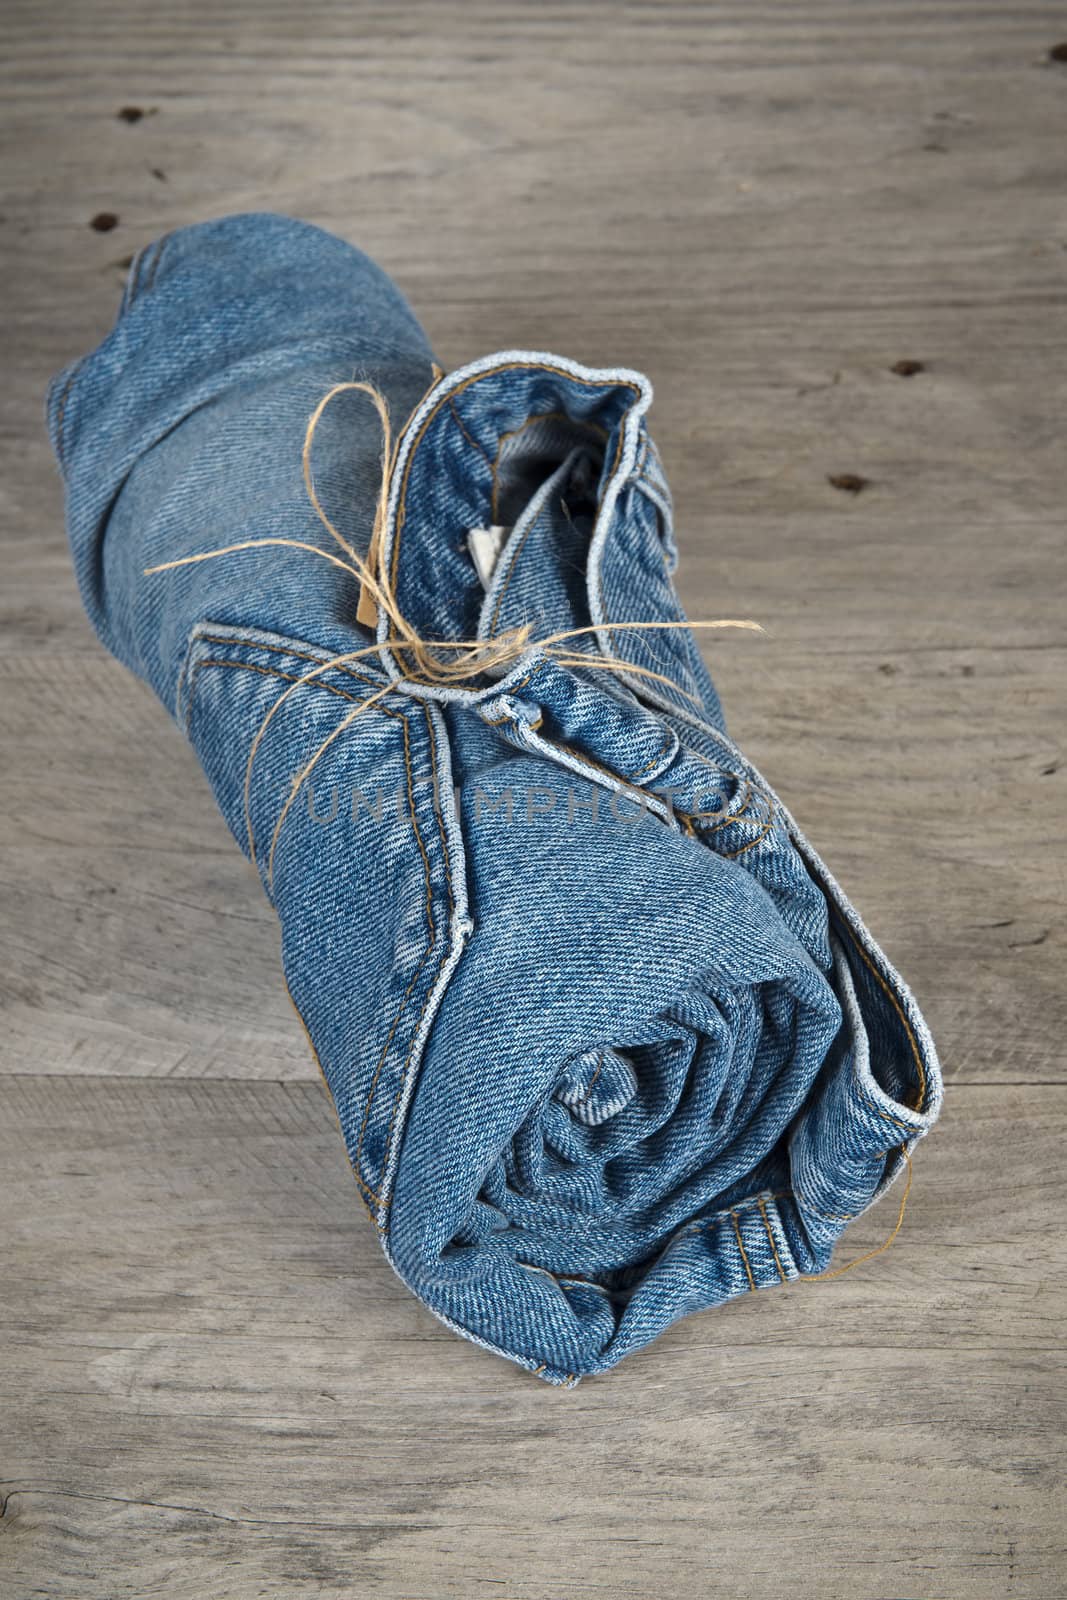 Rolled worn blue jeans over an old wooden background